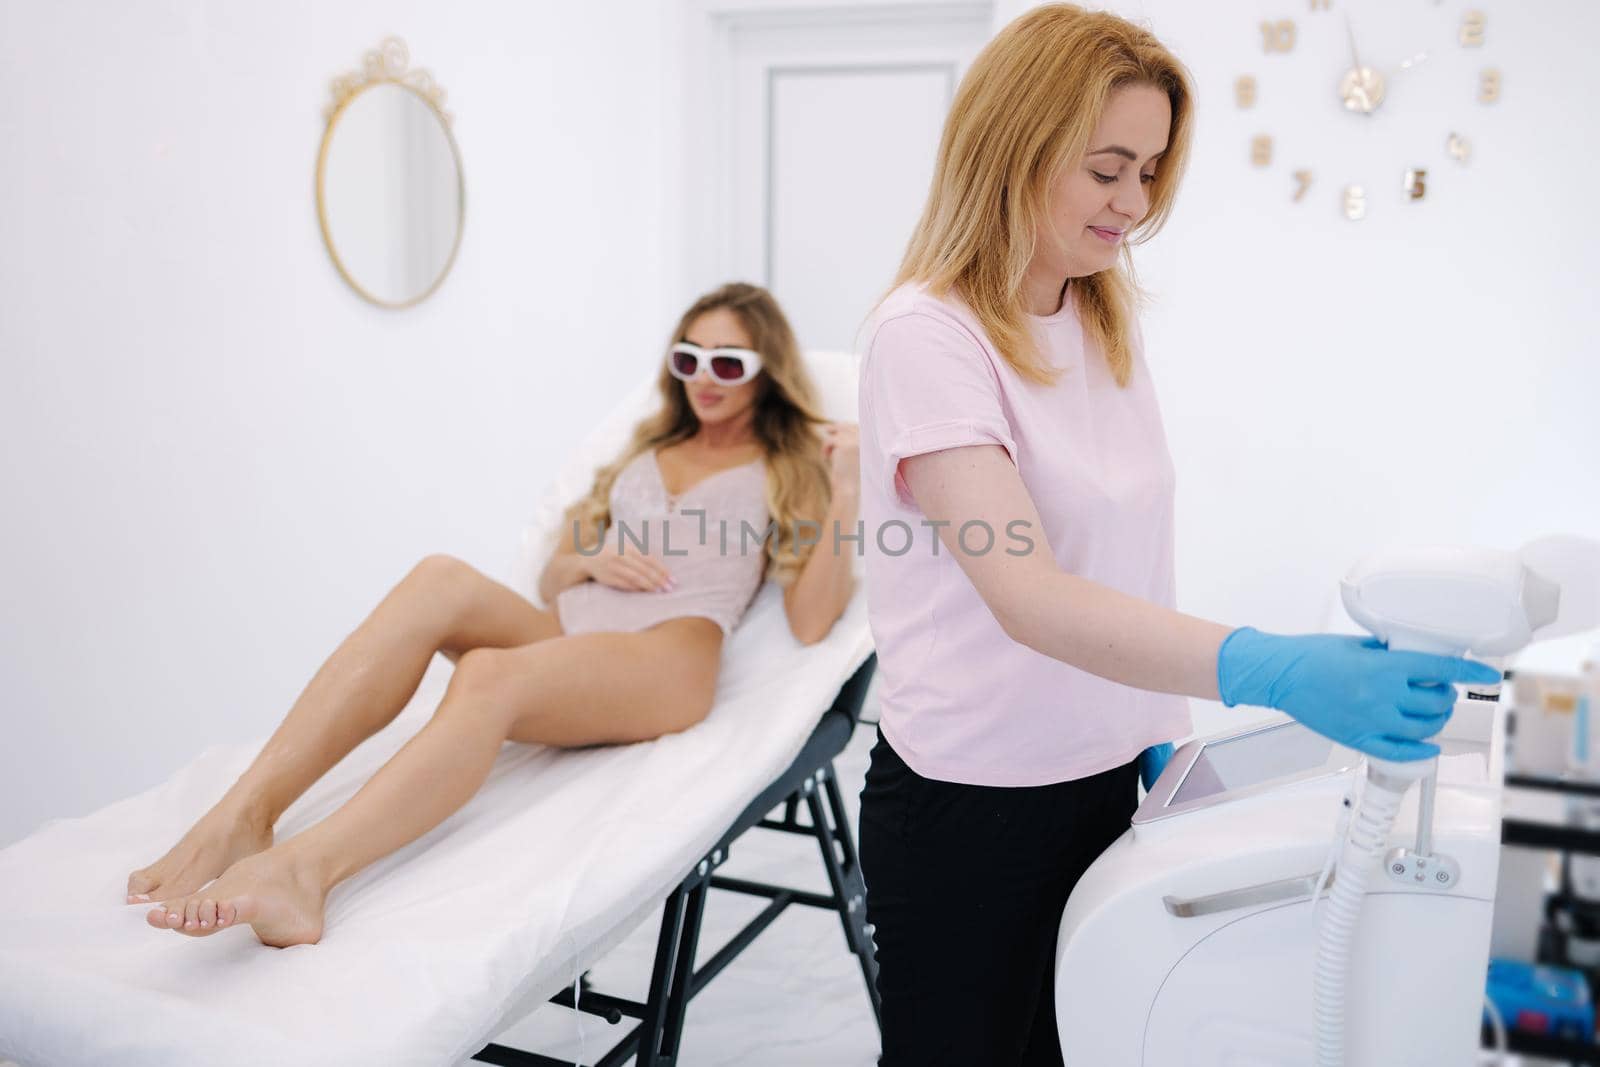 Beautician doing epilation on beautiful woman's leg in mediacl center. Female receiving laser light hair removal treatment for hairless smooth skin at cosmetology salon.